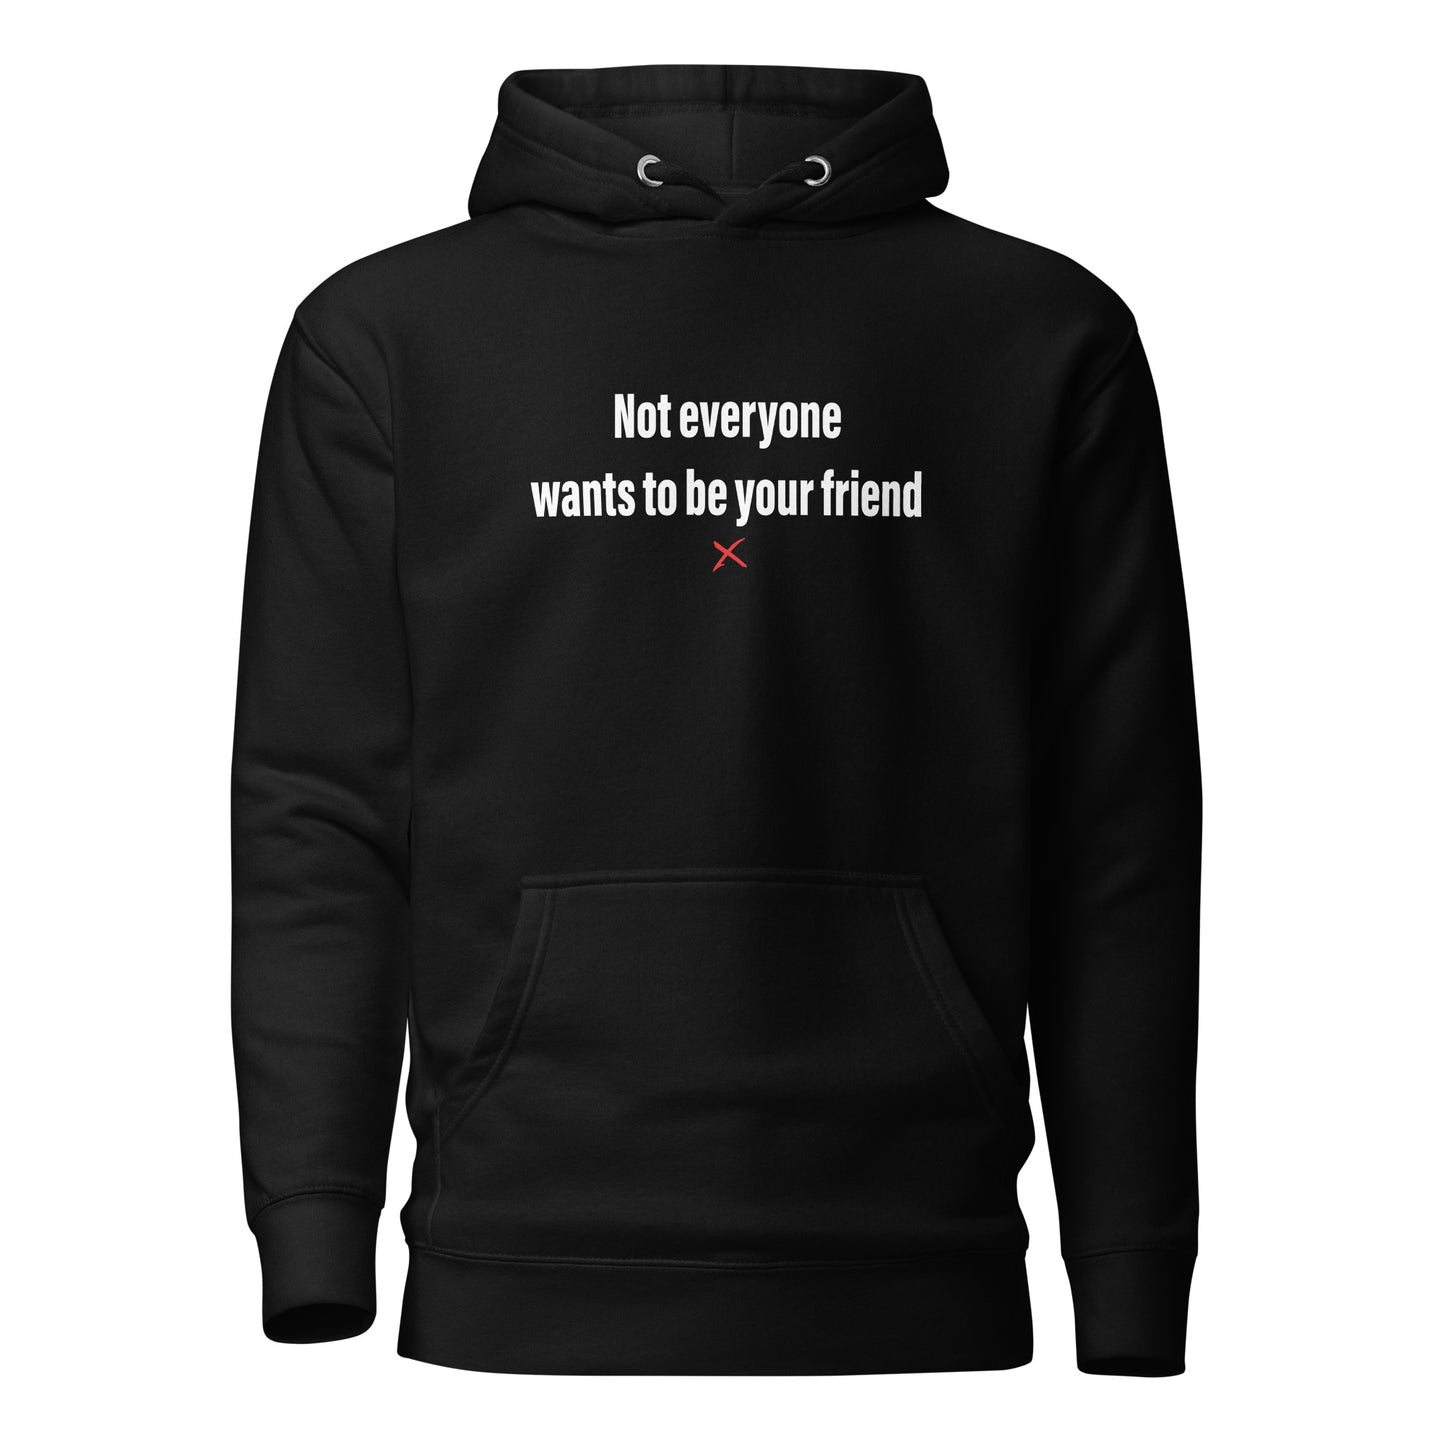 Not everyone wants to be your friend - Hoodie